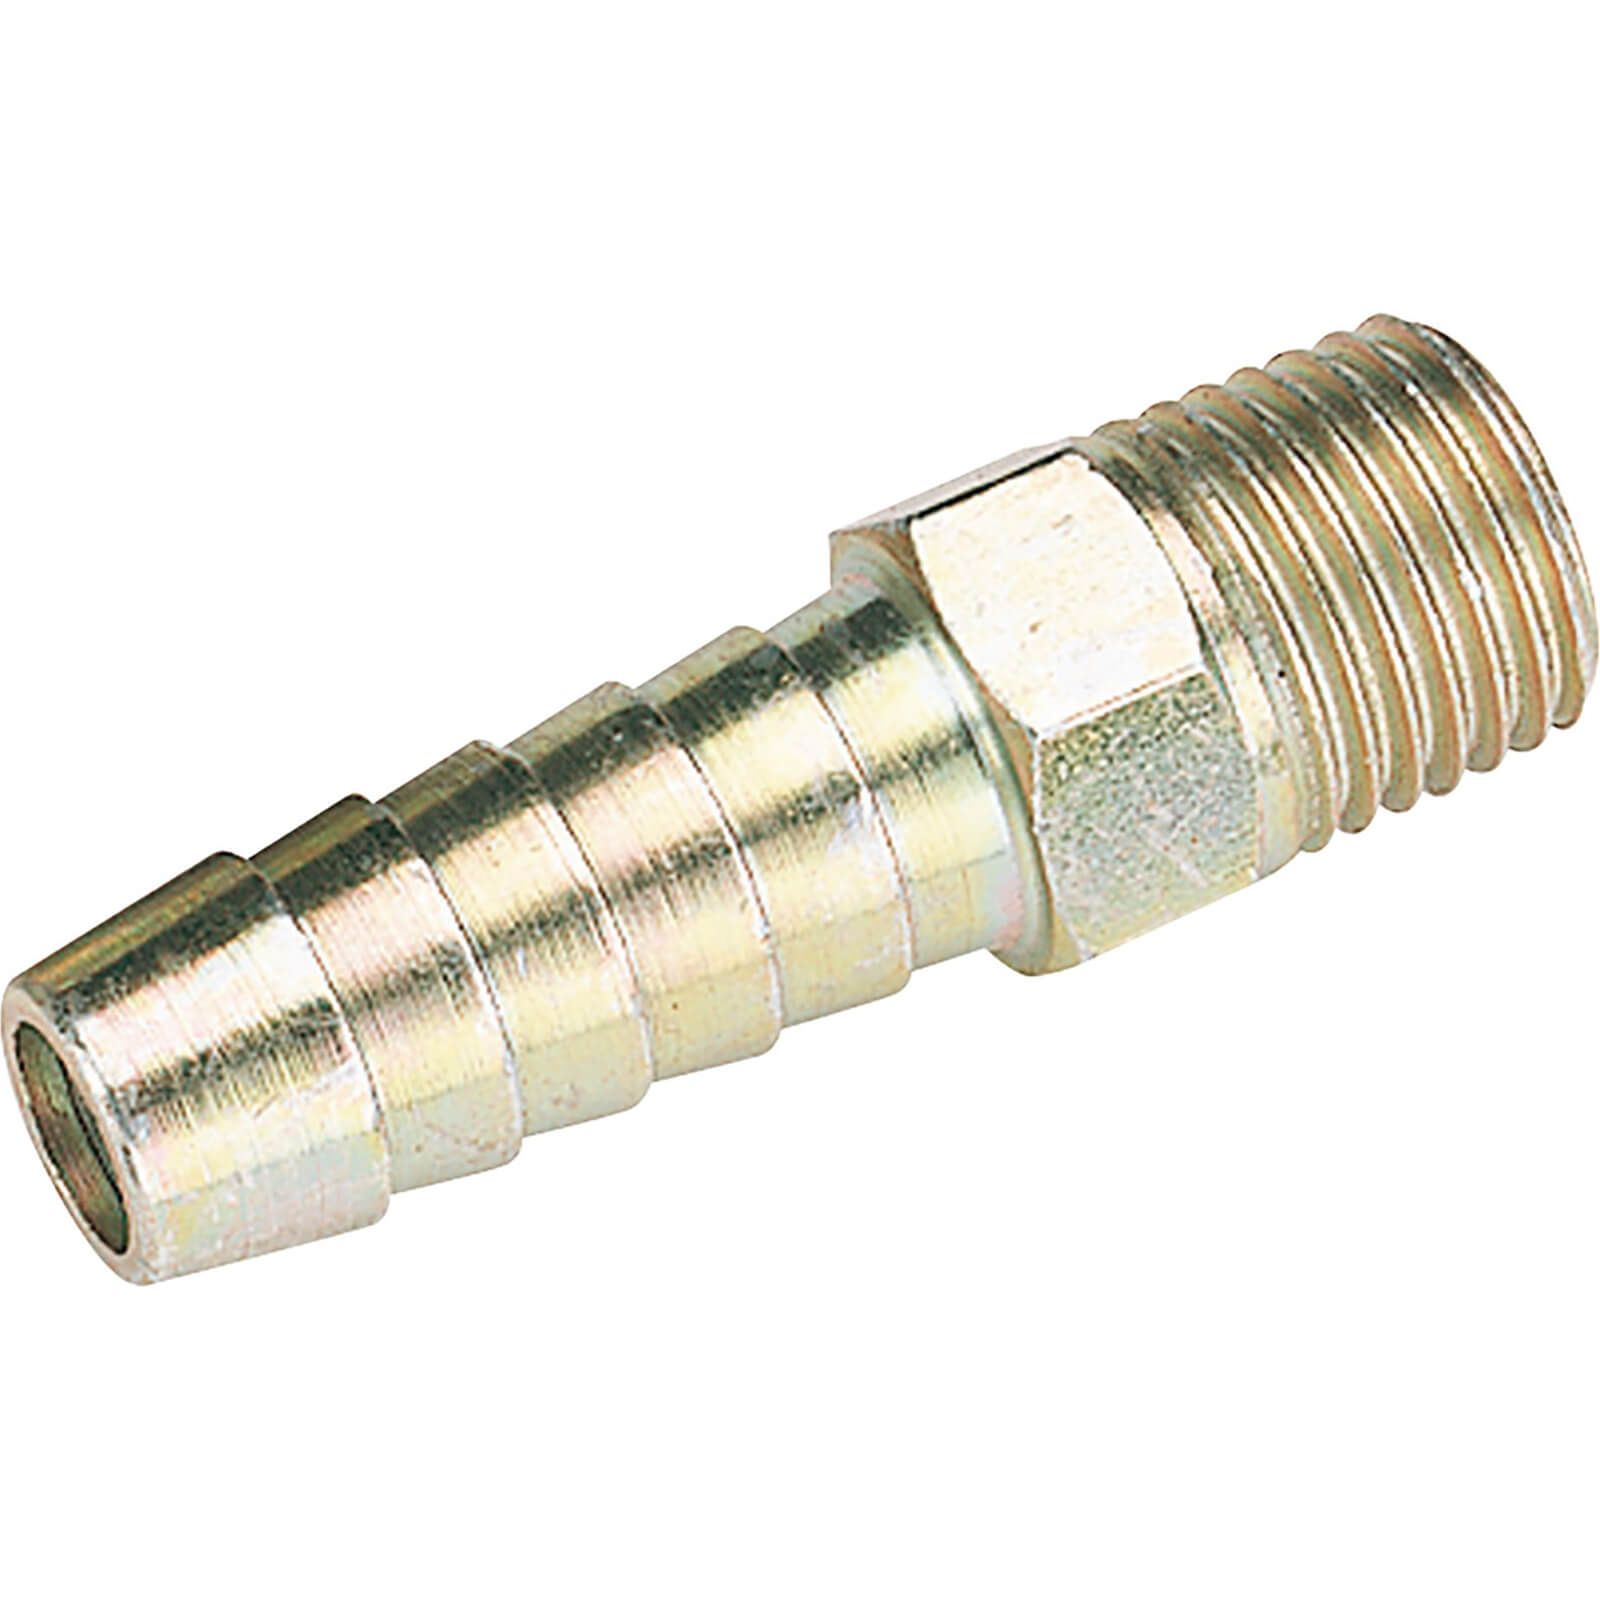 Image of Draper PCL Tailpiece Air Line Fitting BSPT Male Thread 1/4" BSP 3/8" Pack of 1